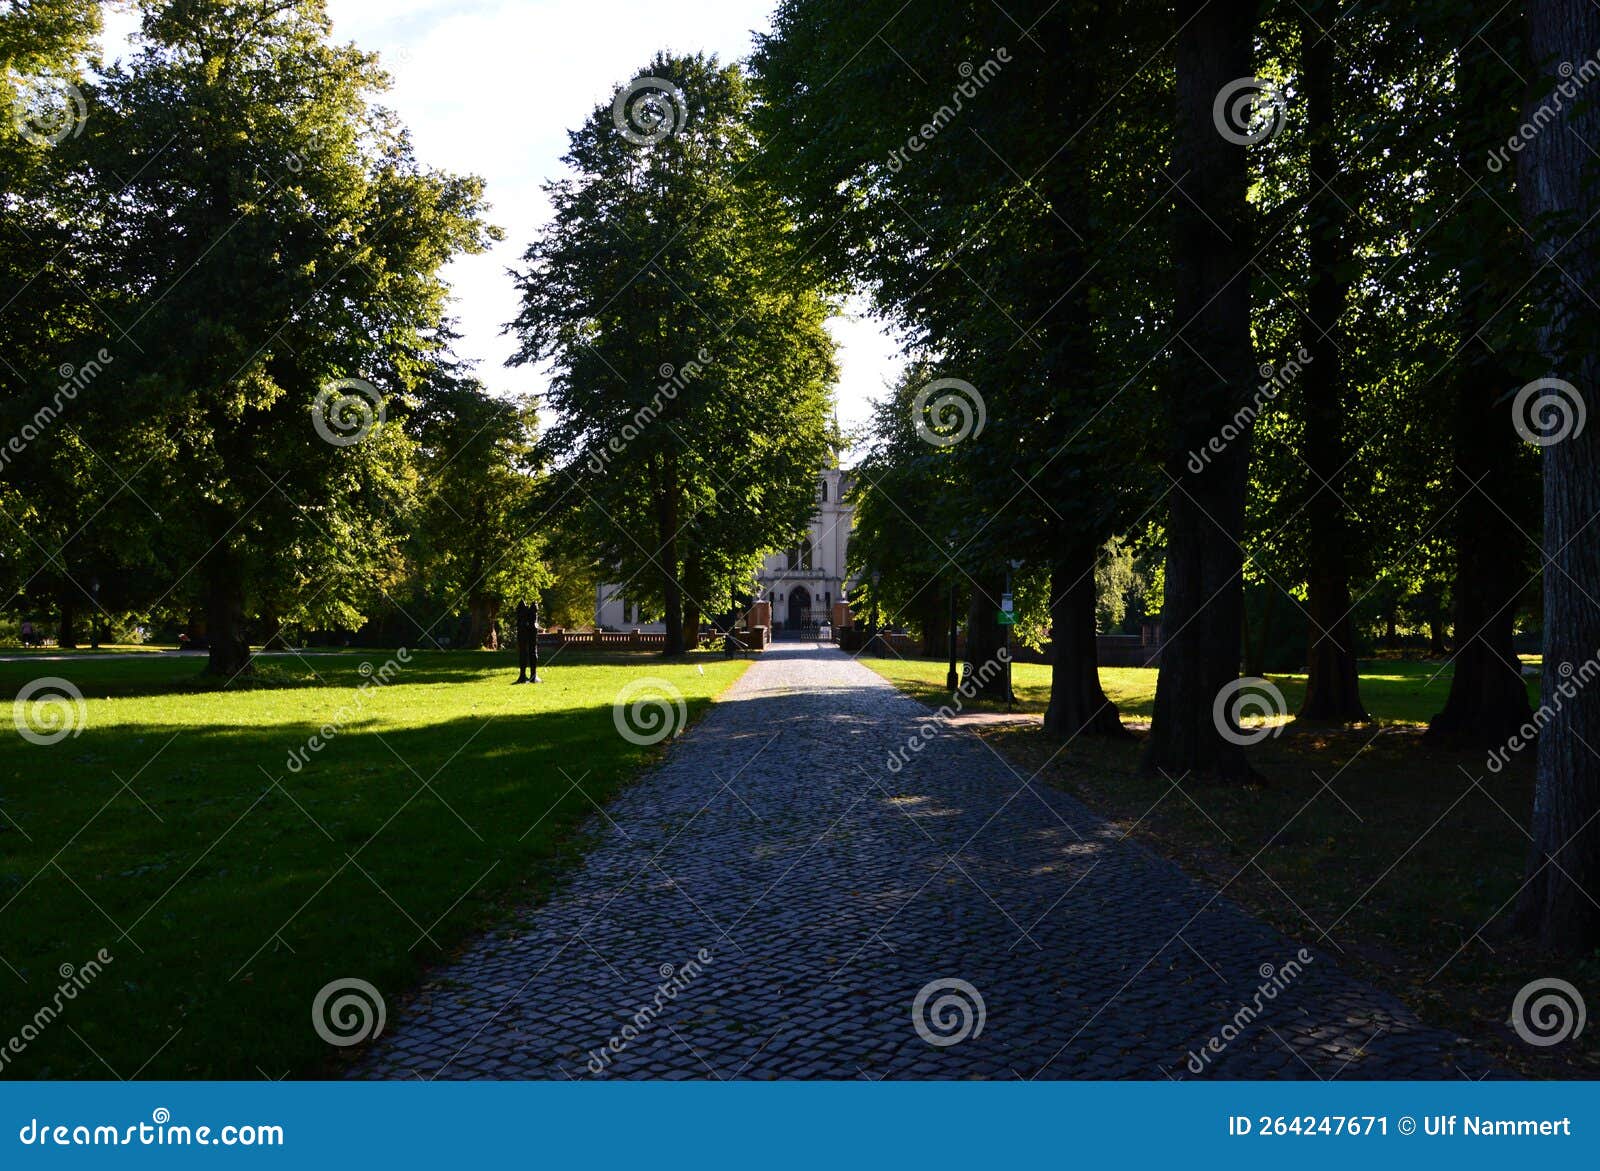 historical castle and park evenburg in the town loga, leer, east frisia, lower saxony